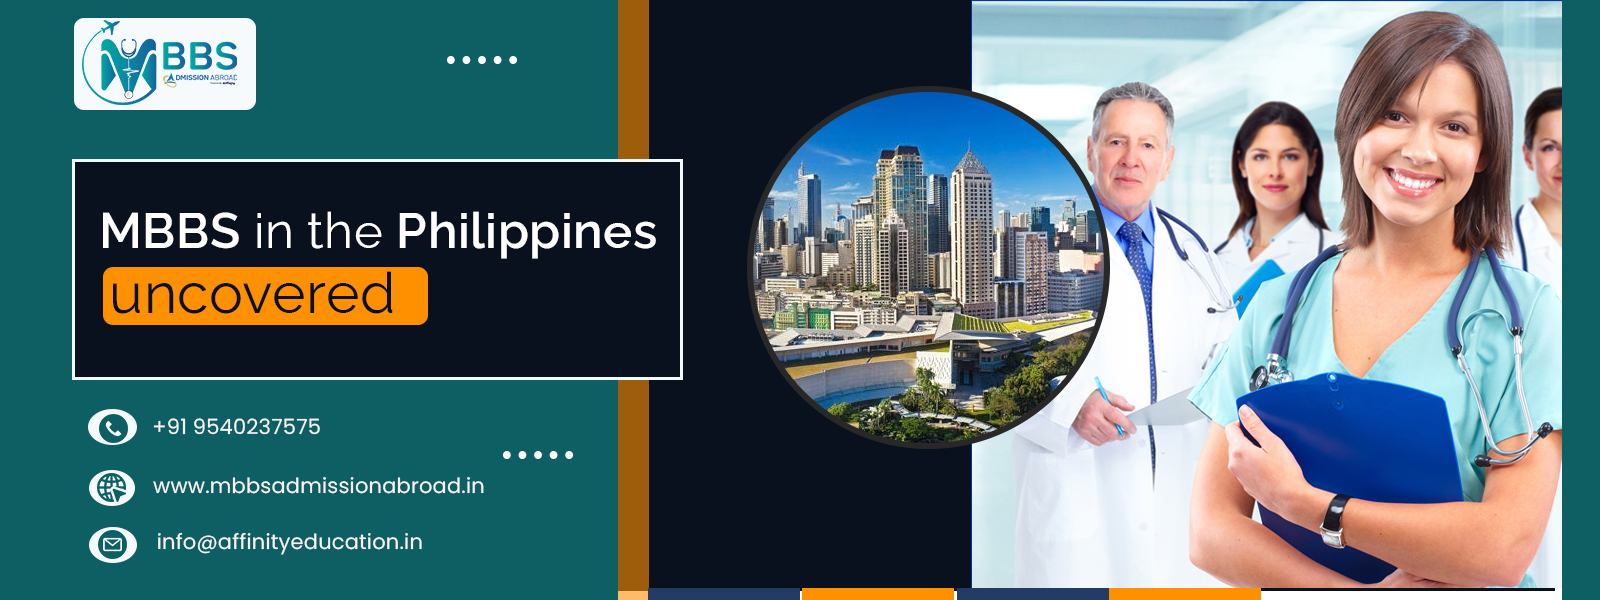 MBBS in the Philippines uncovered